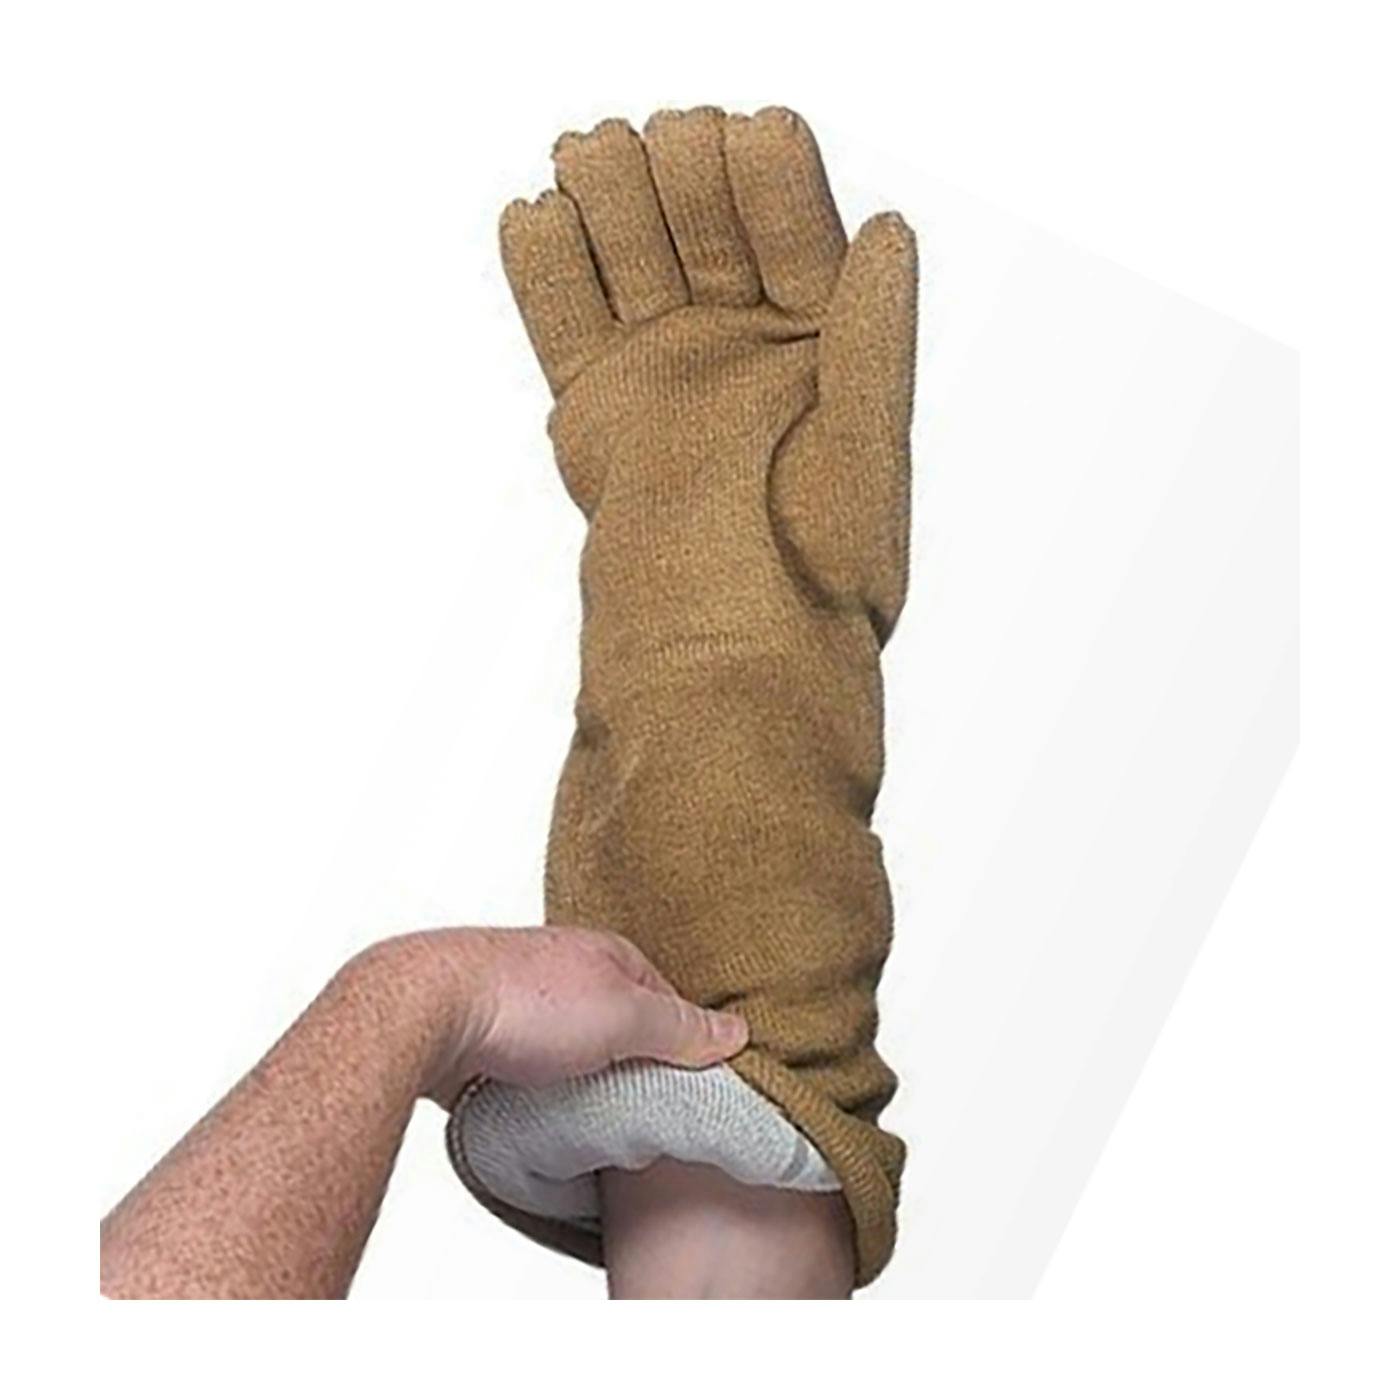 Heat & Cold Resistant Electrostatic Dissipative (ESD) Glove with PBI® Outer Shell and Nylon / Wool Lining - 18", Brown (55G) - L